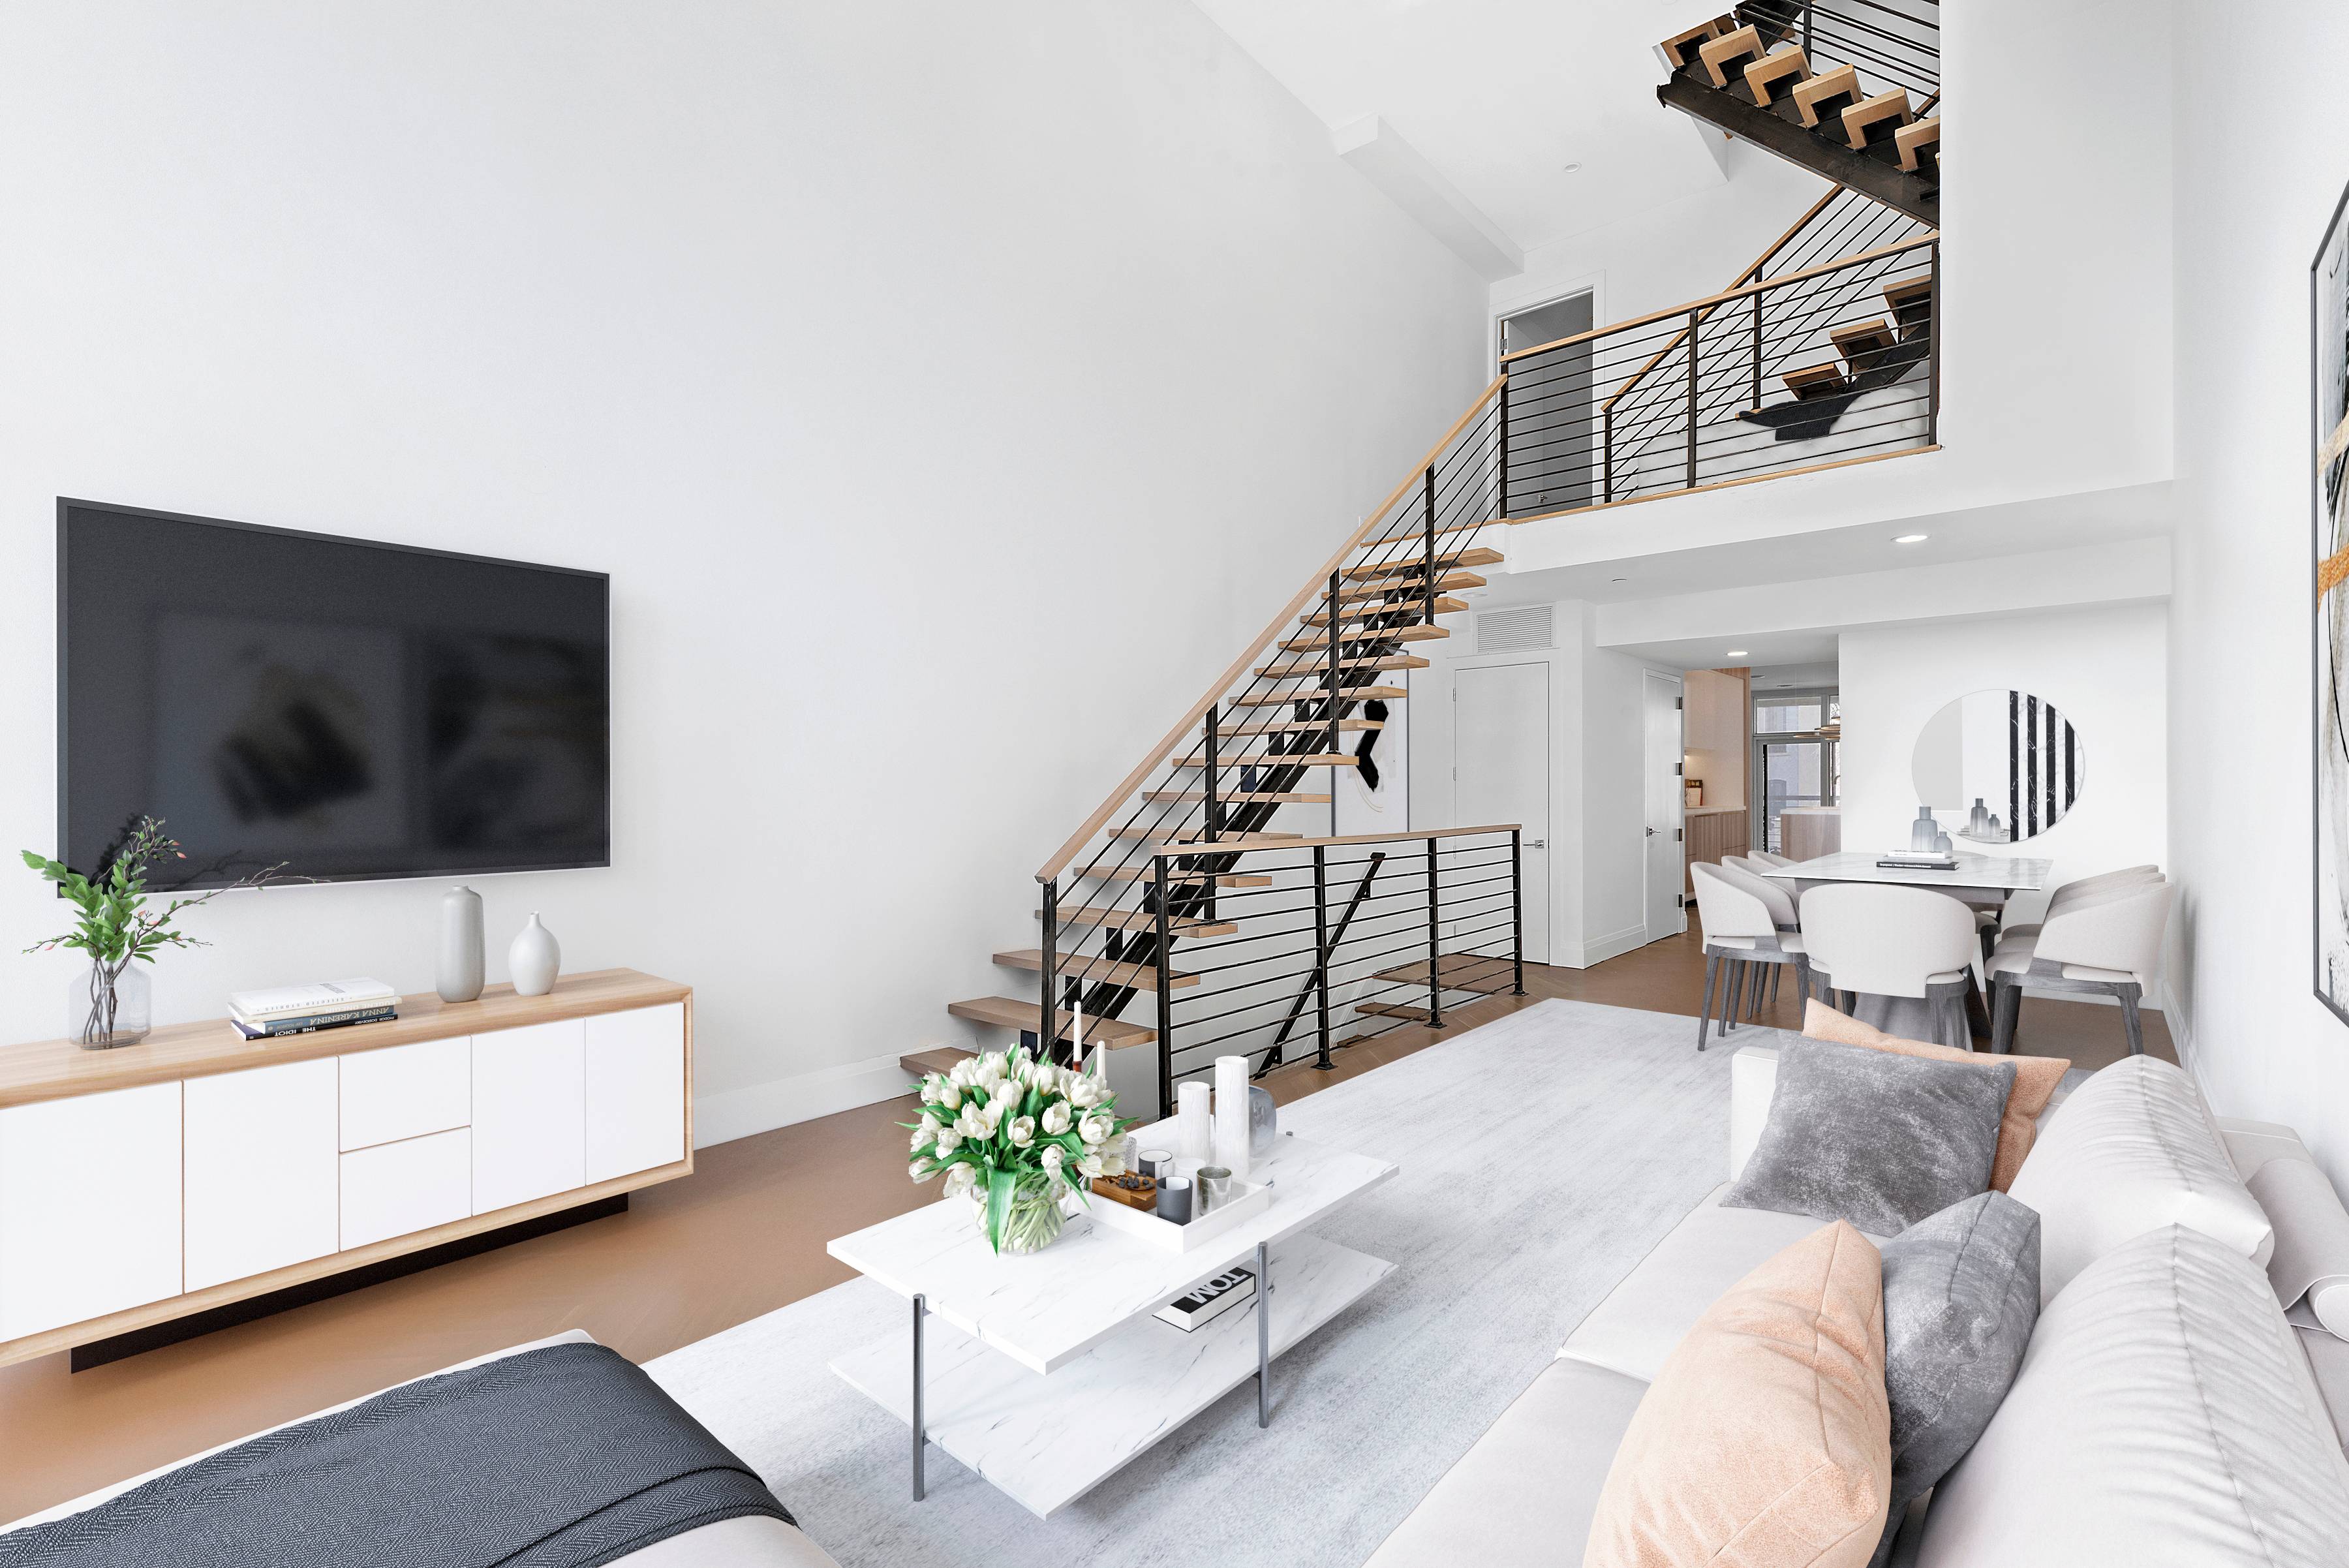 This extraordinary new construction two family building takes regal townhouse living to new heights with chic contemporary design, premium finishes, and breathtaking outdoor space on nearly every level.